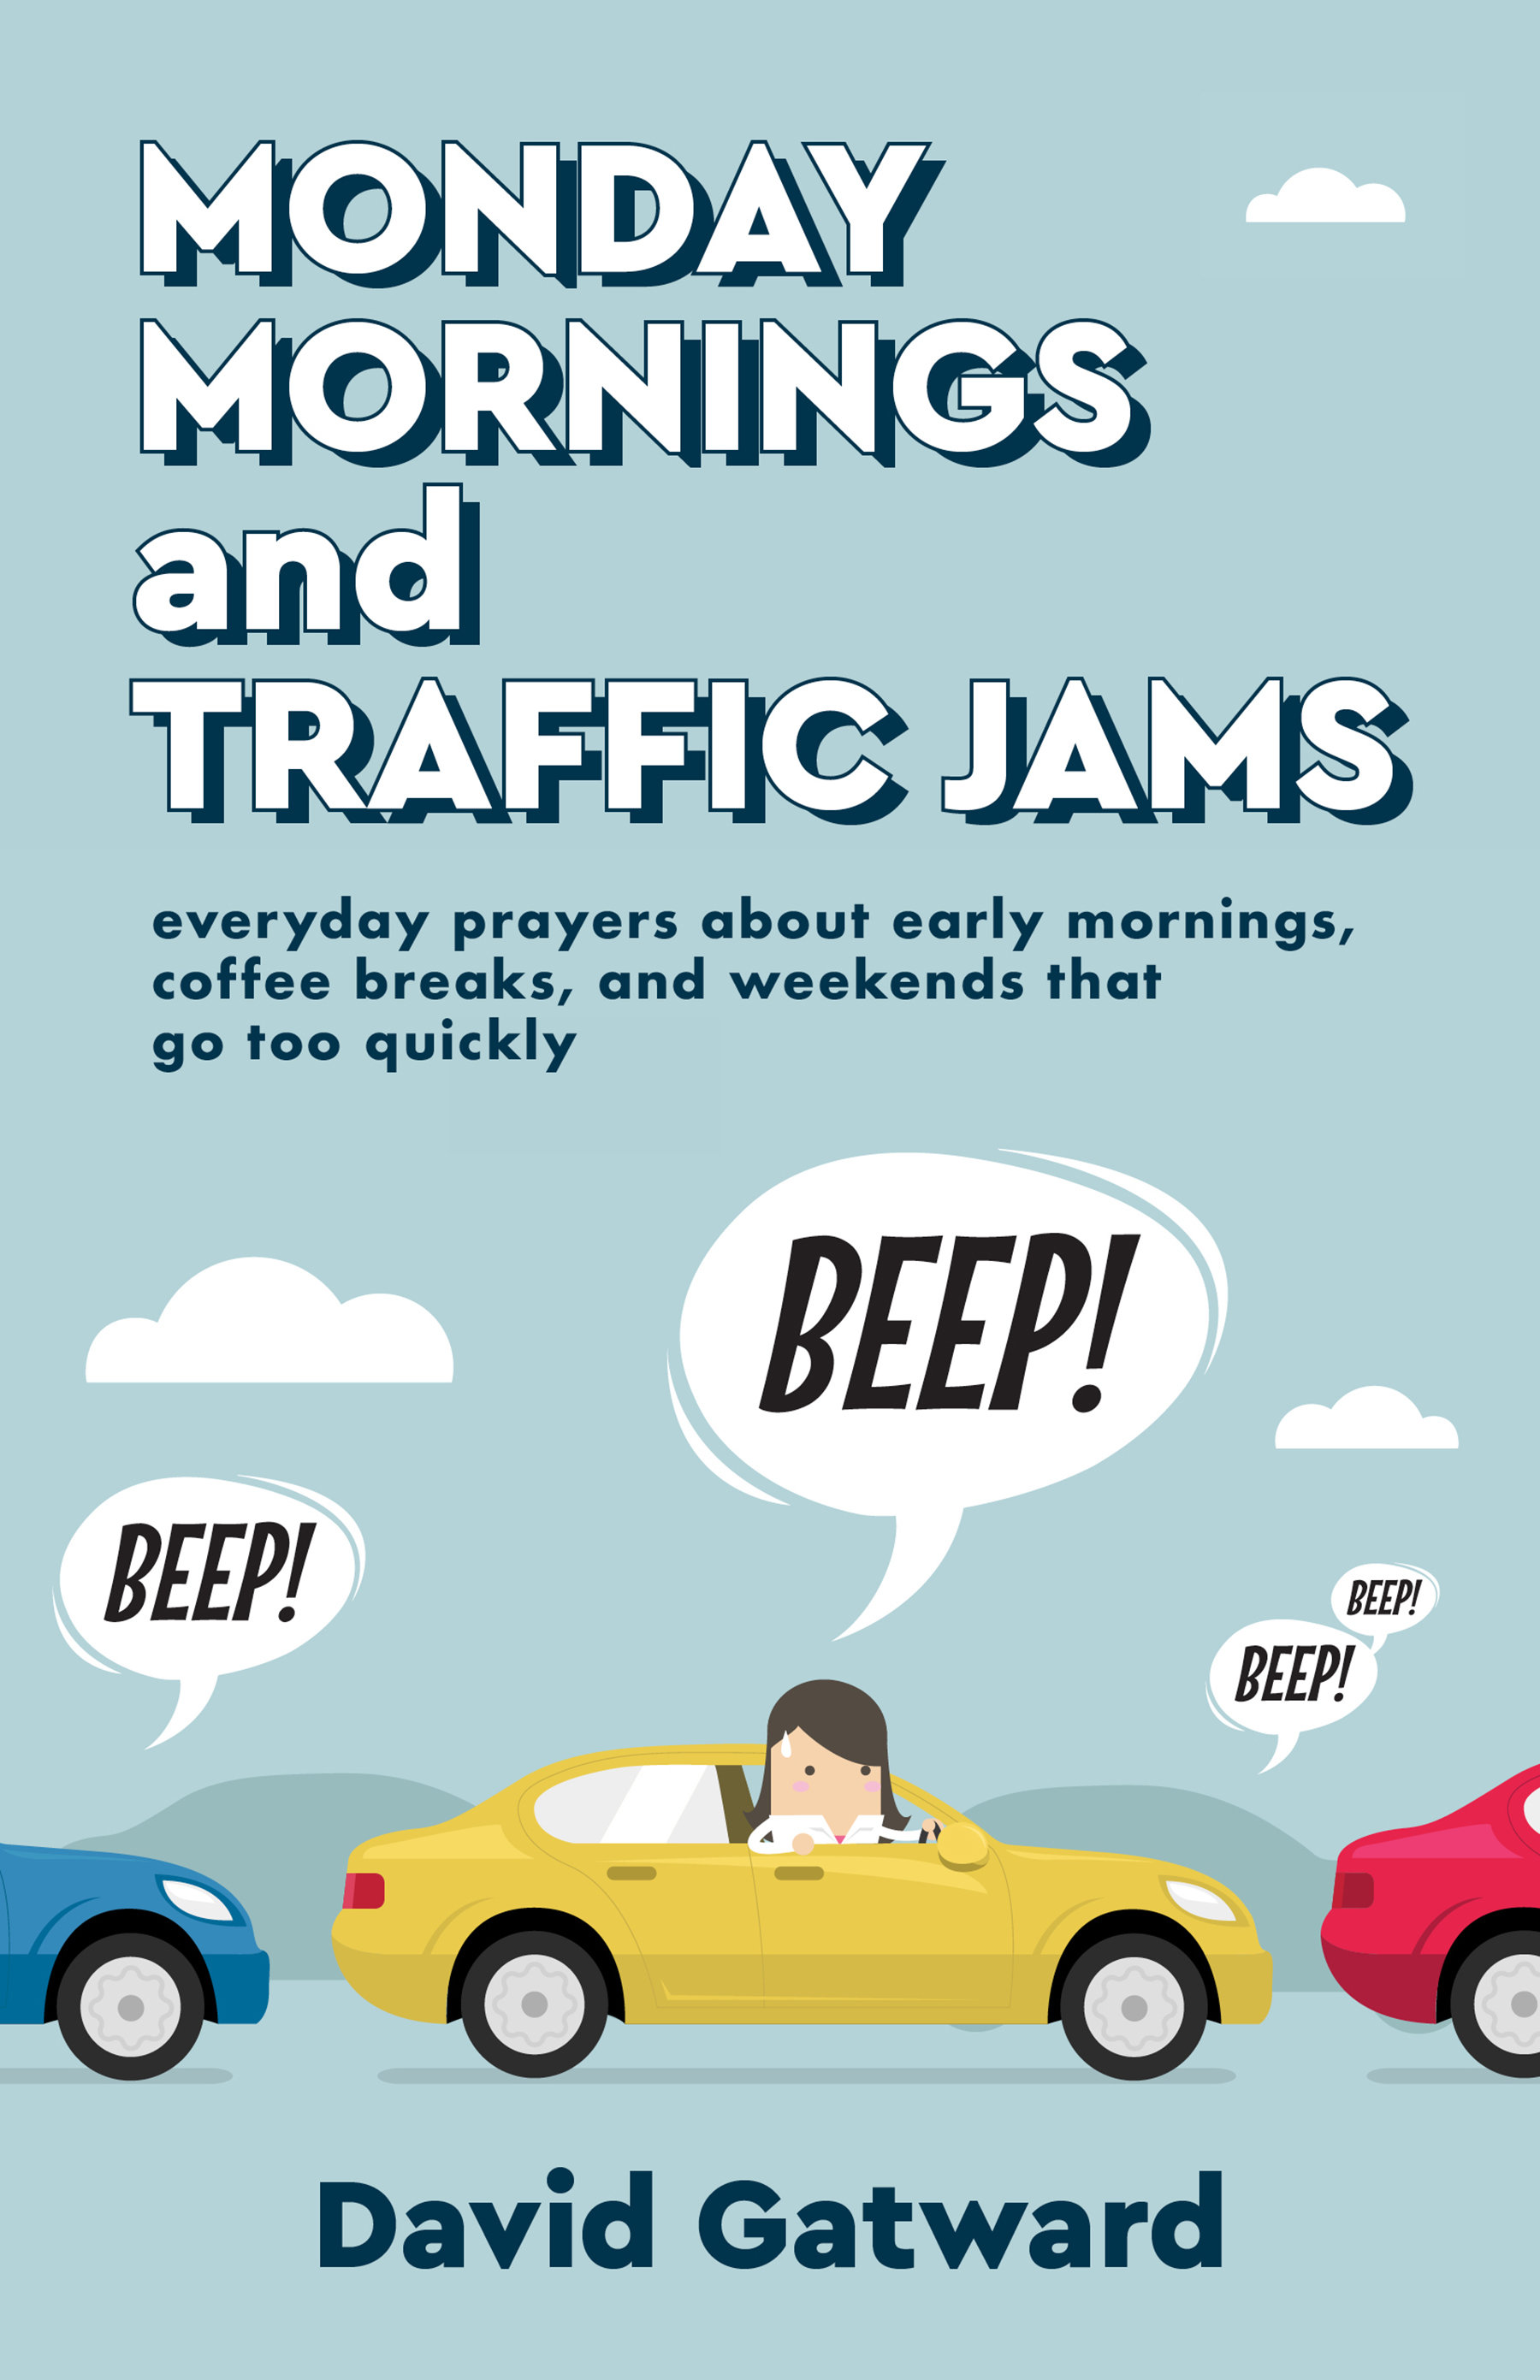 Monday Mornings and Traffic Jams: Everyday Prayers about Early Mornings, Coffee Breaks, and Weekends That Go Too Quickly